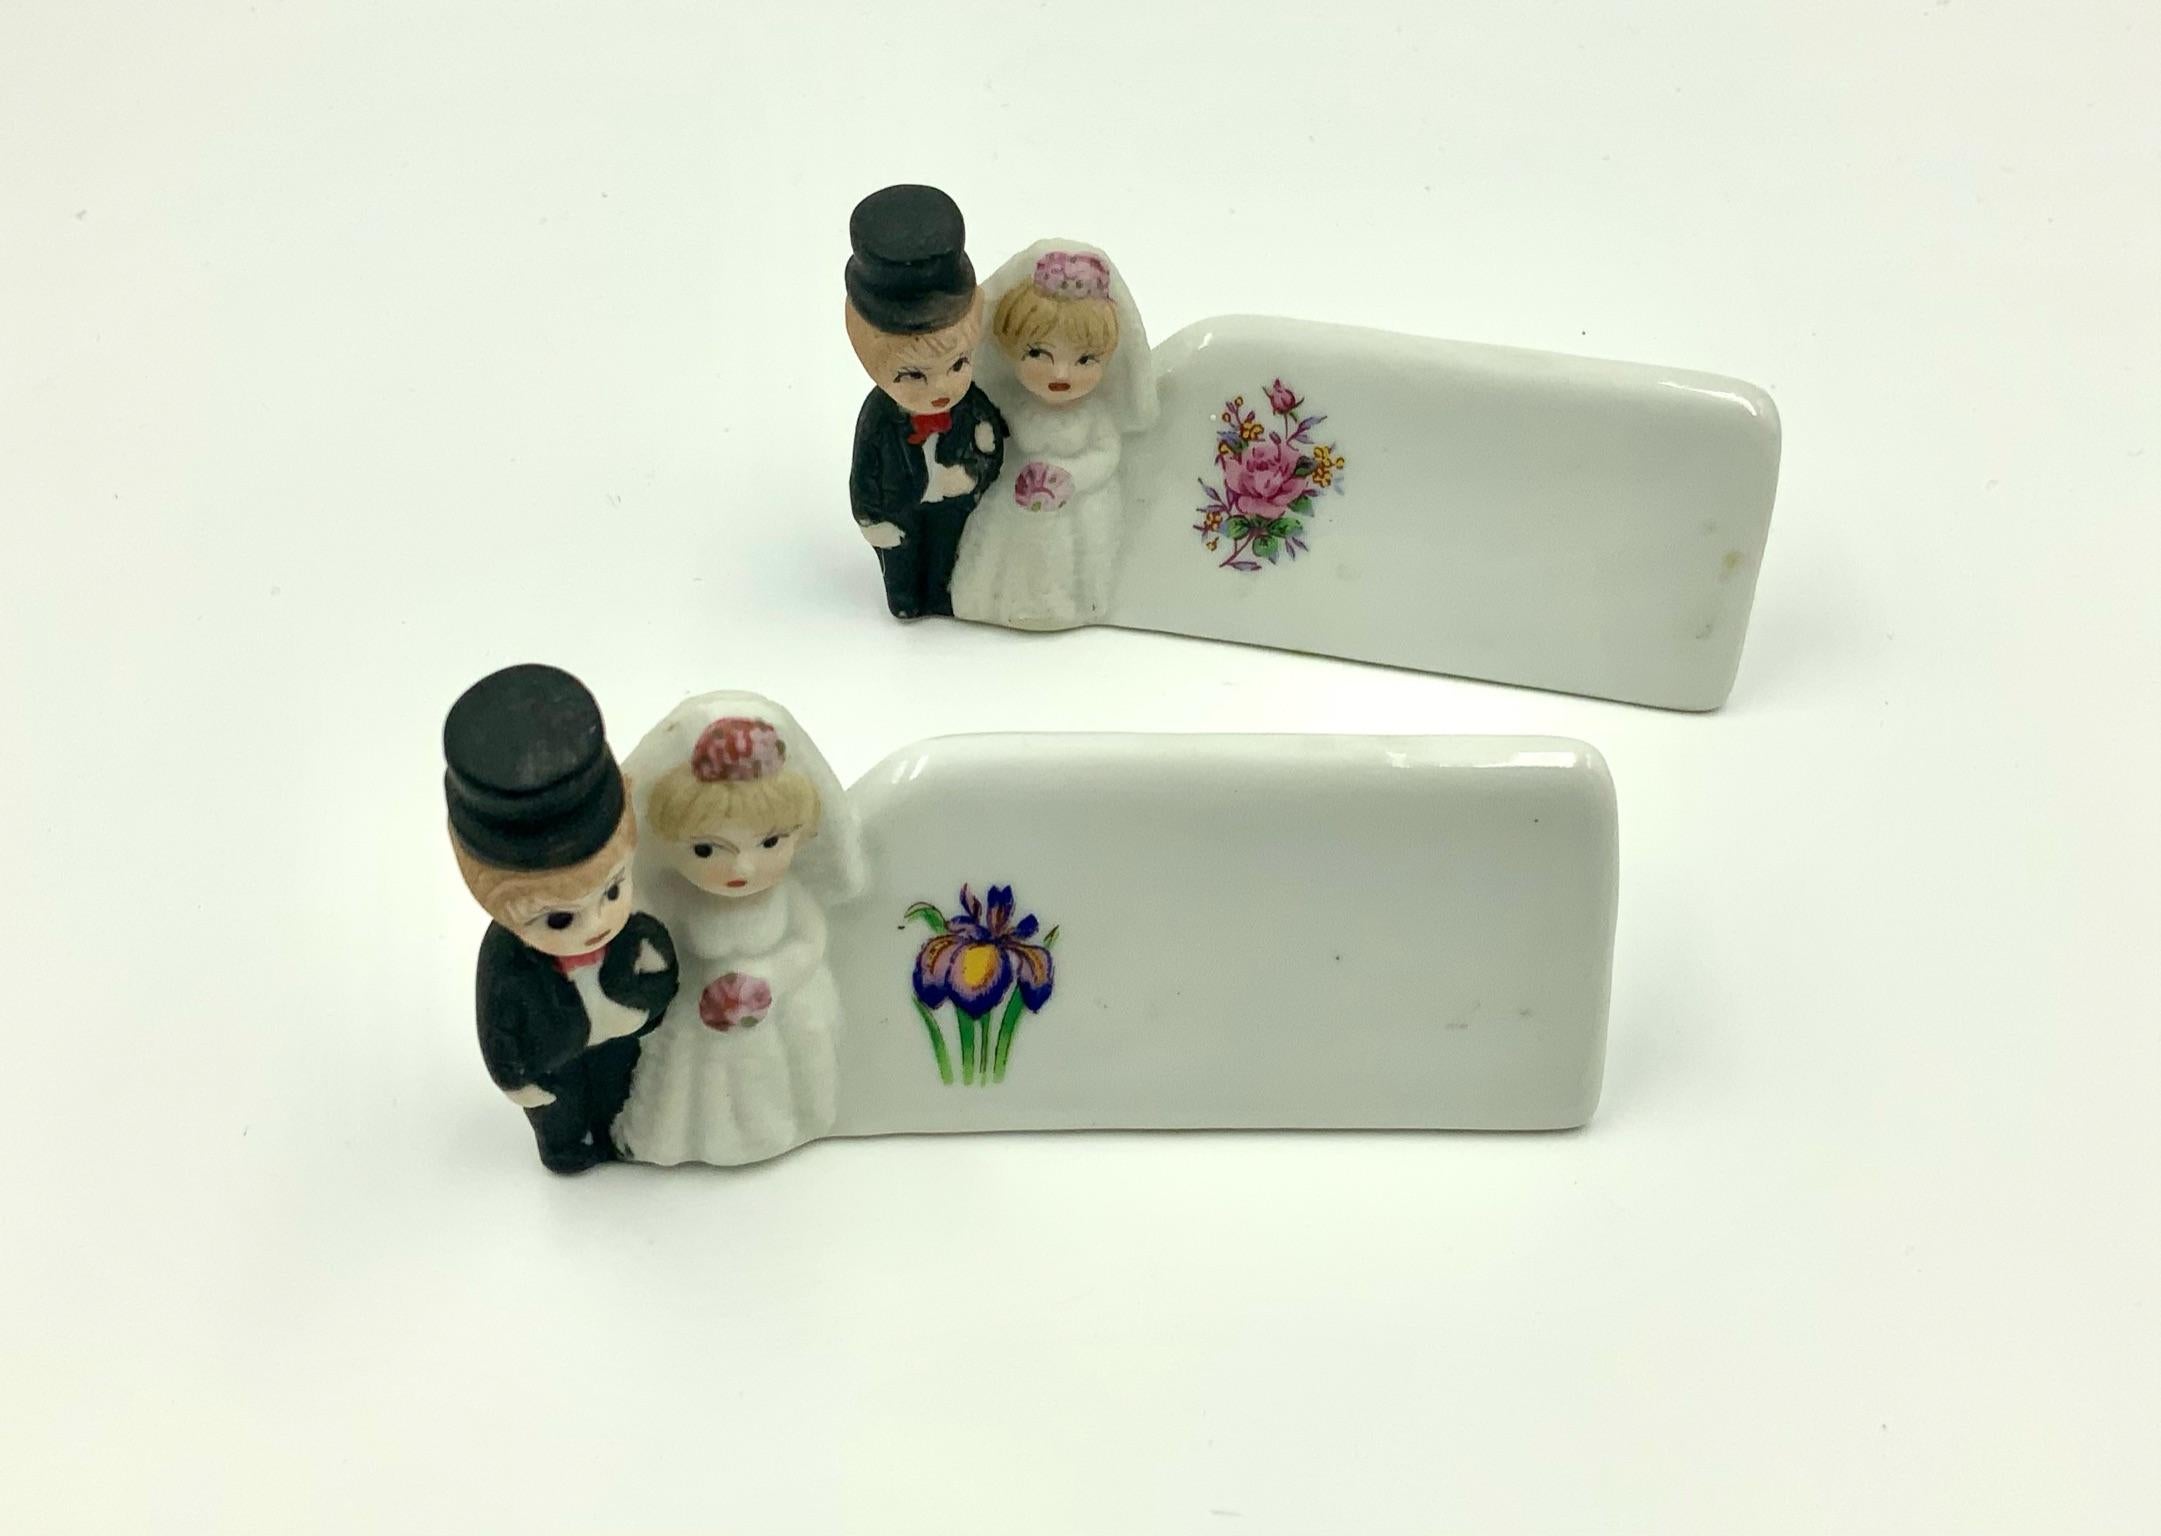 Hard to find adorable hand-painted bride and groom place card holders with flower decals. I have 3 sets of 2 available. Each pair has a different flower on the name area. One of the sets has a crack on the bottom. That set is listed separately at a